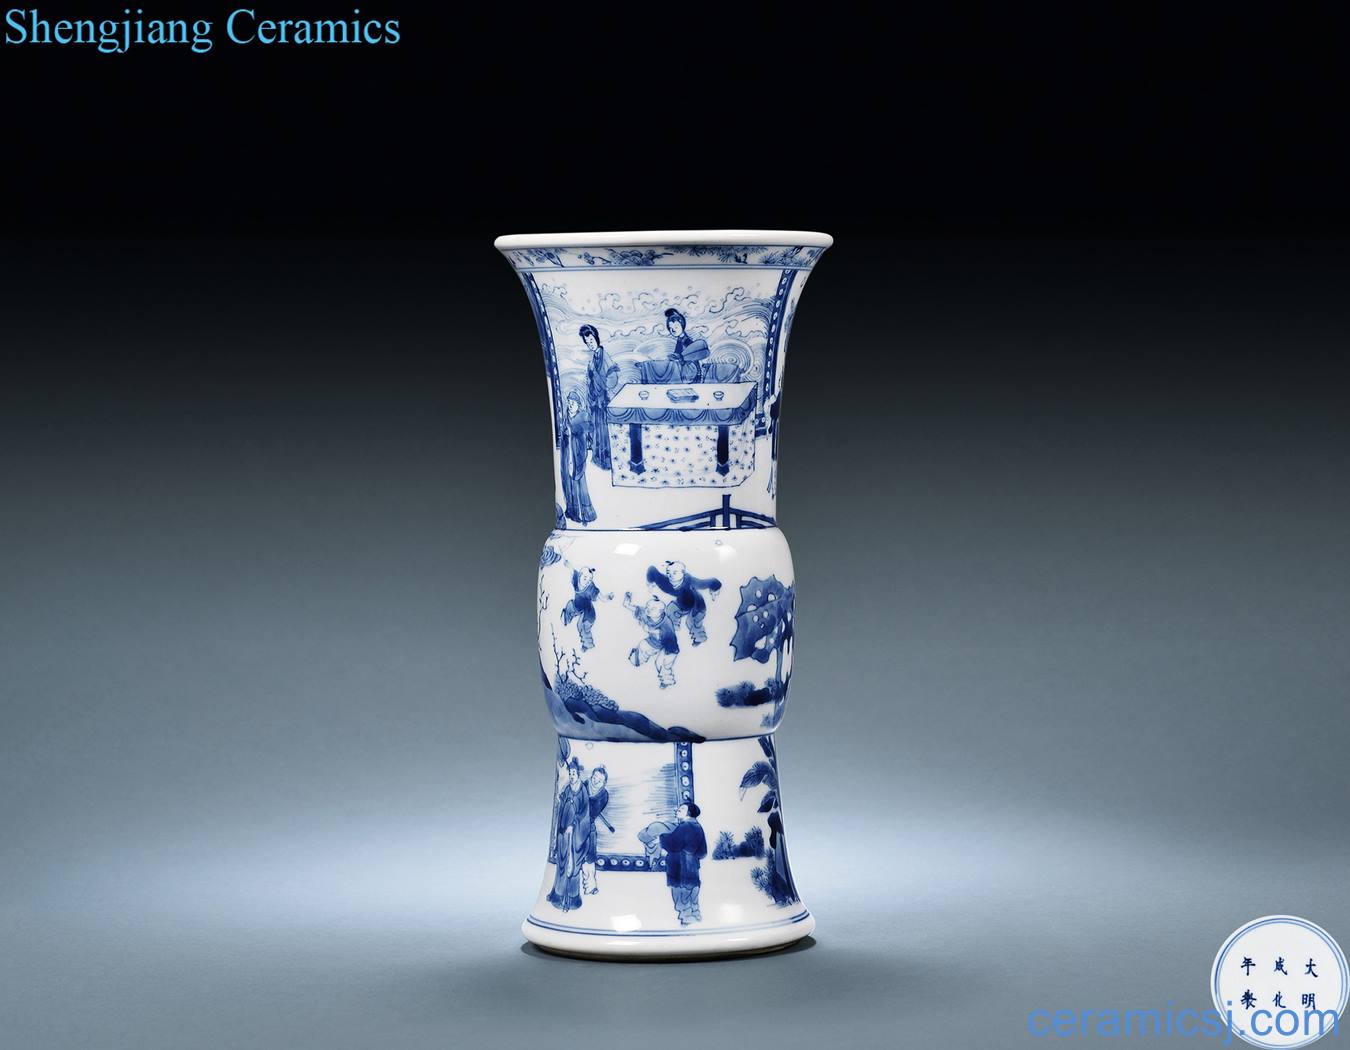 The qing emperor kangxi flower vase with blue and white "person of the west chamber" story